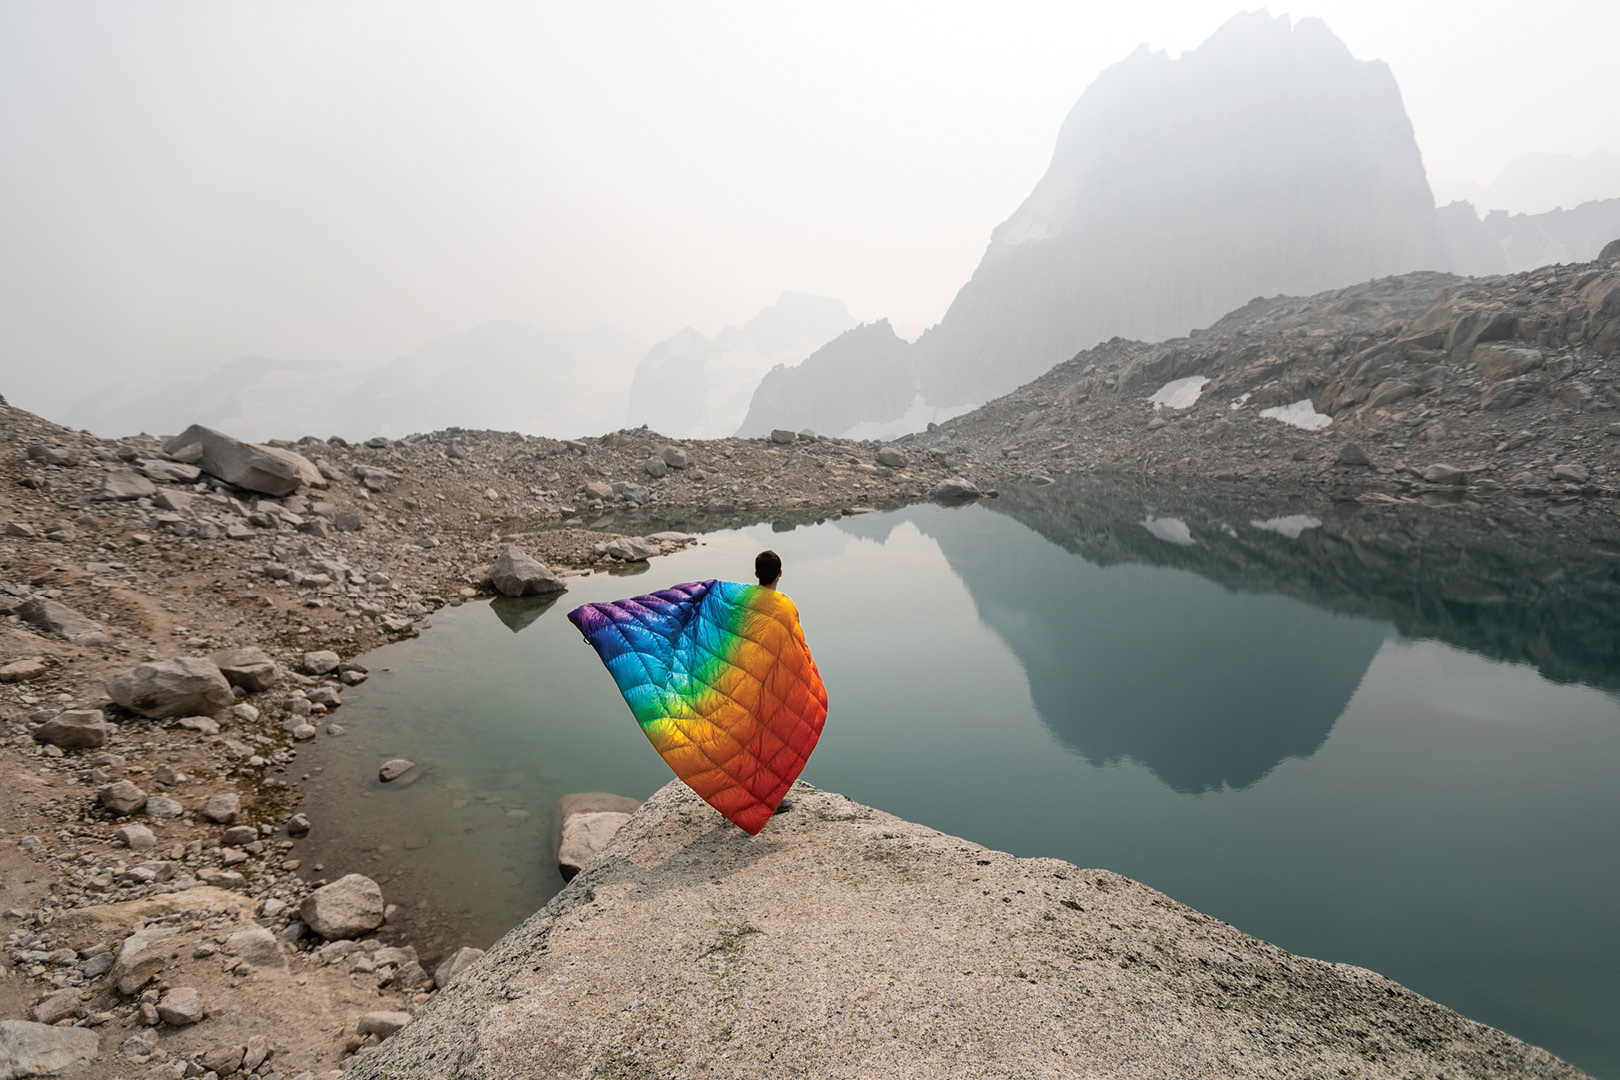 Man with a rainbow blanket, standing on a rock looking out into a barren lake